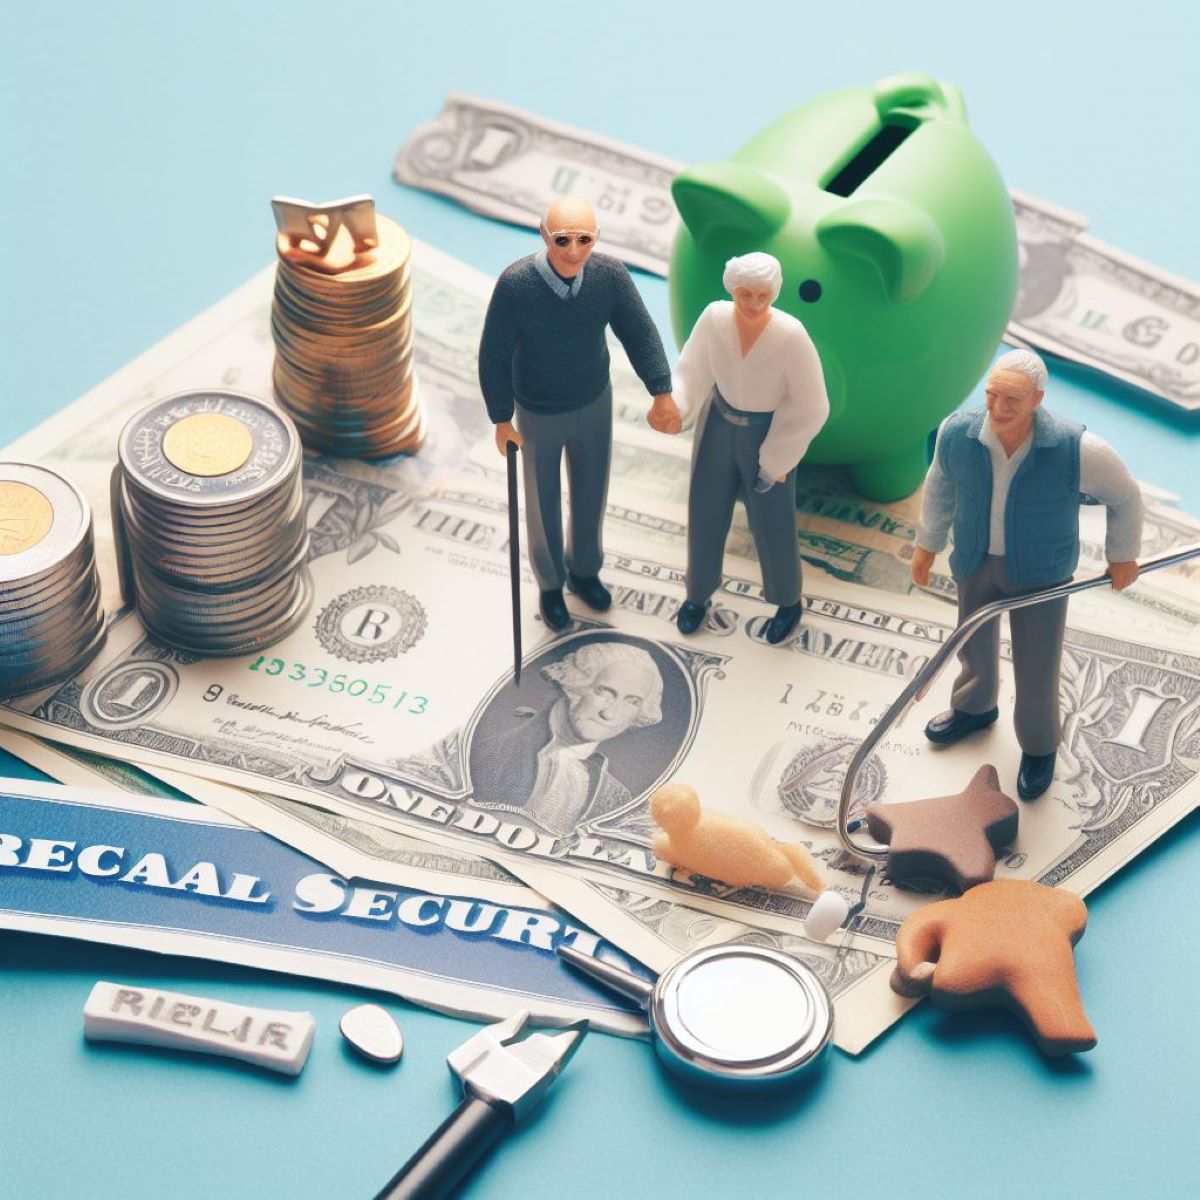 What Is The Importance Of Social Security System In Retirement Planning